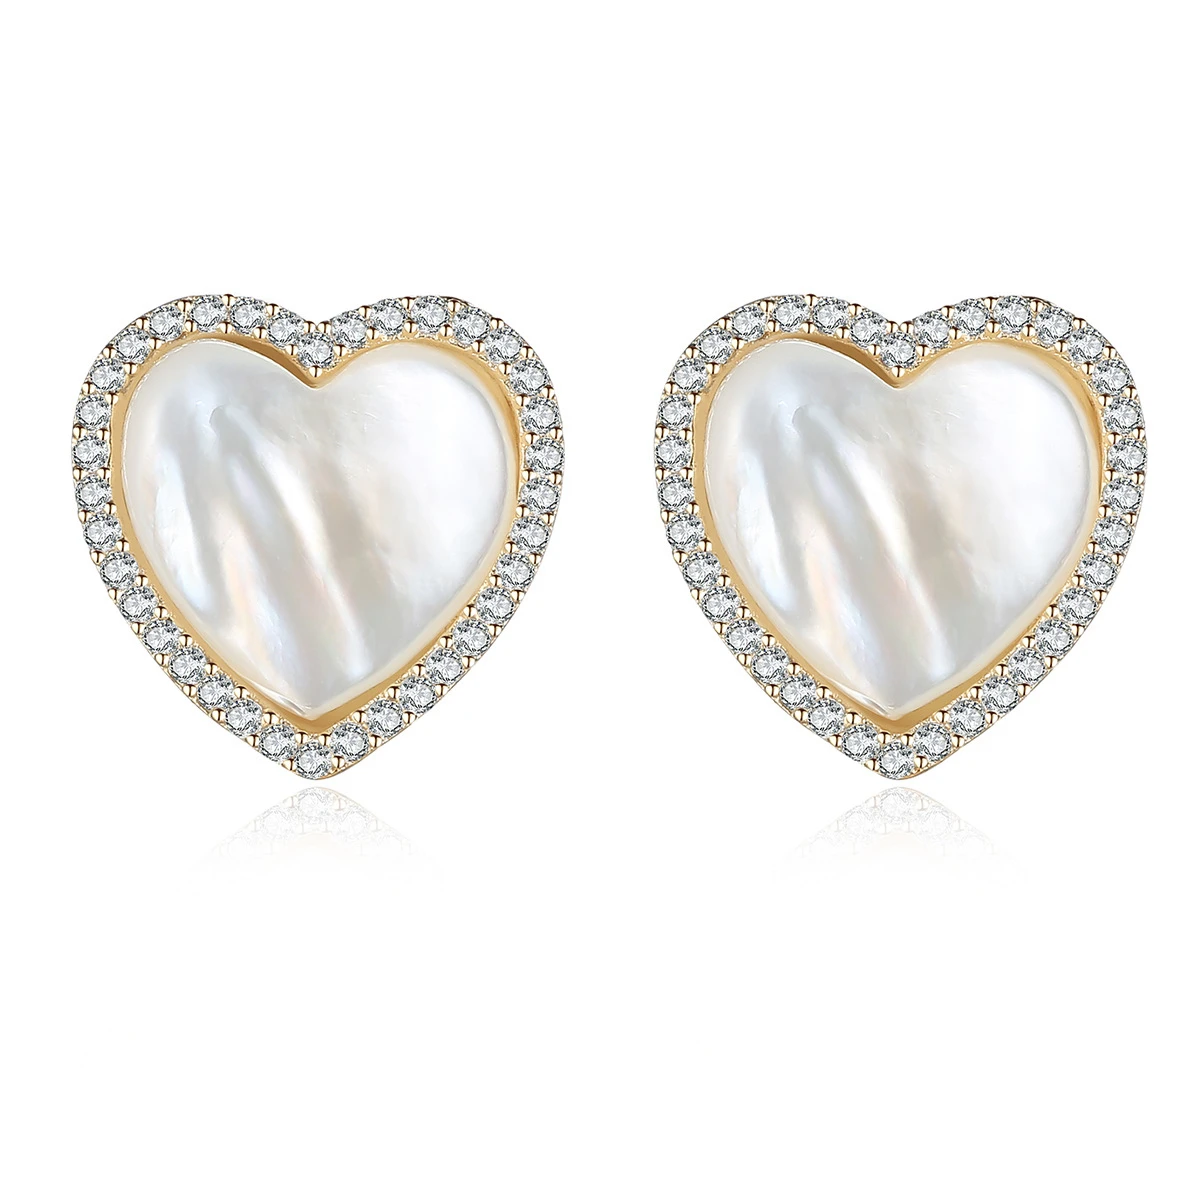 925 Balinese Shell Earring 34959 Heart Design Solid Silver